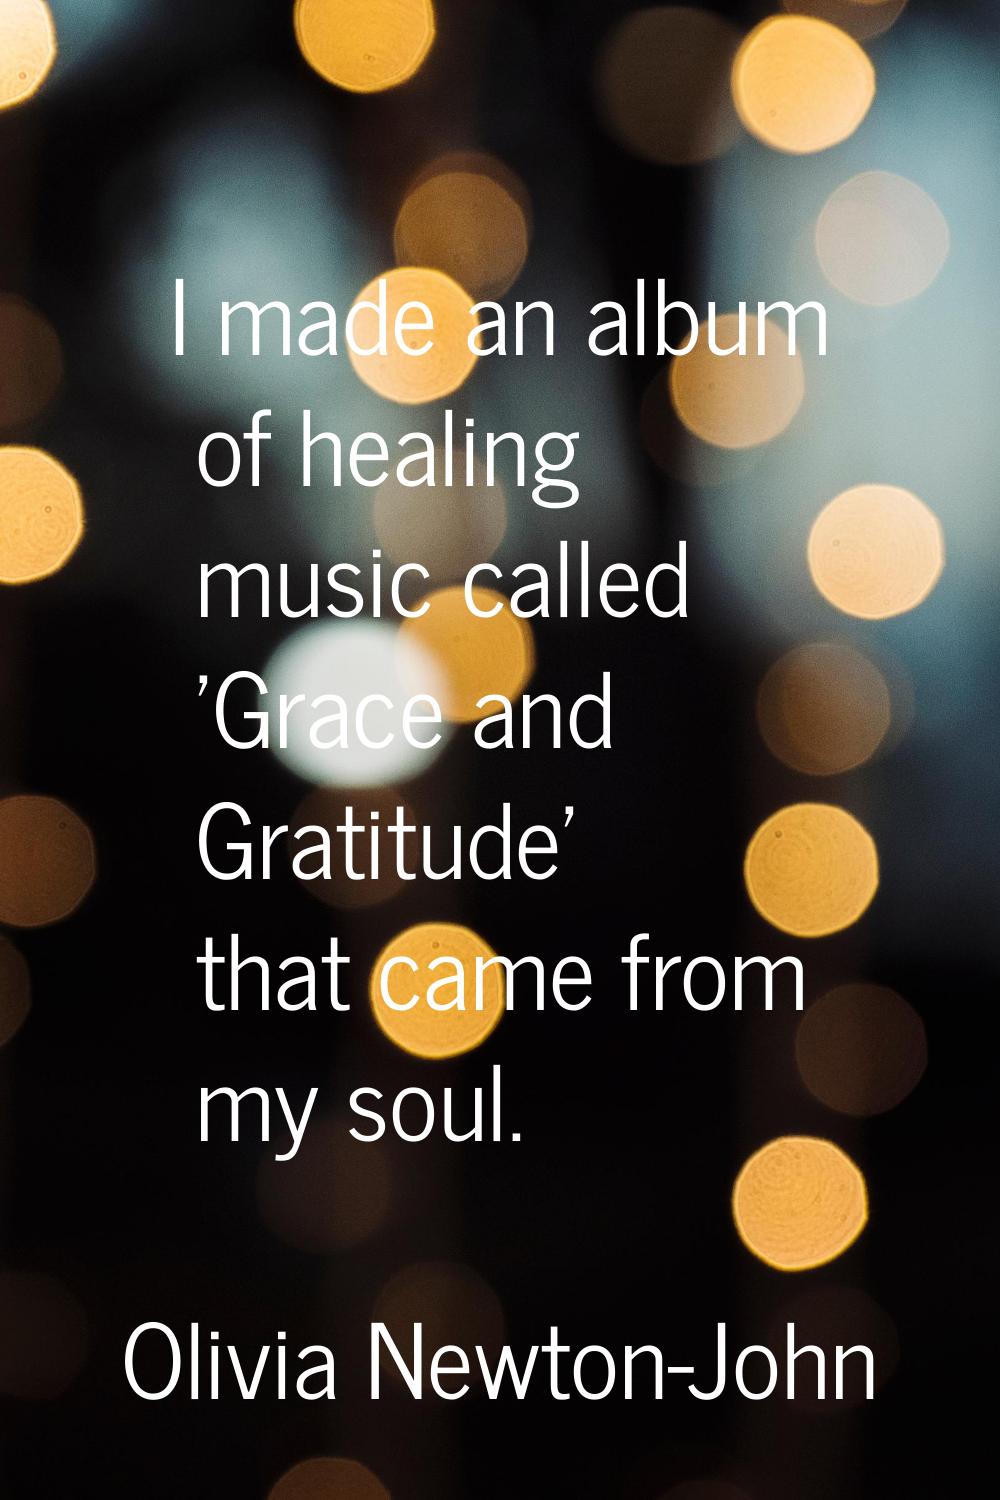 I made an album of healing music called 'Grace and Gratitude' that came from my soul.